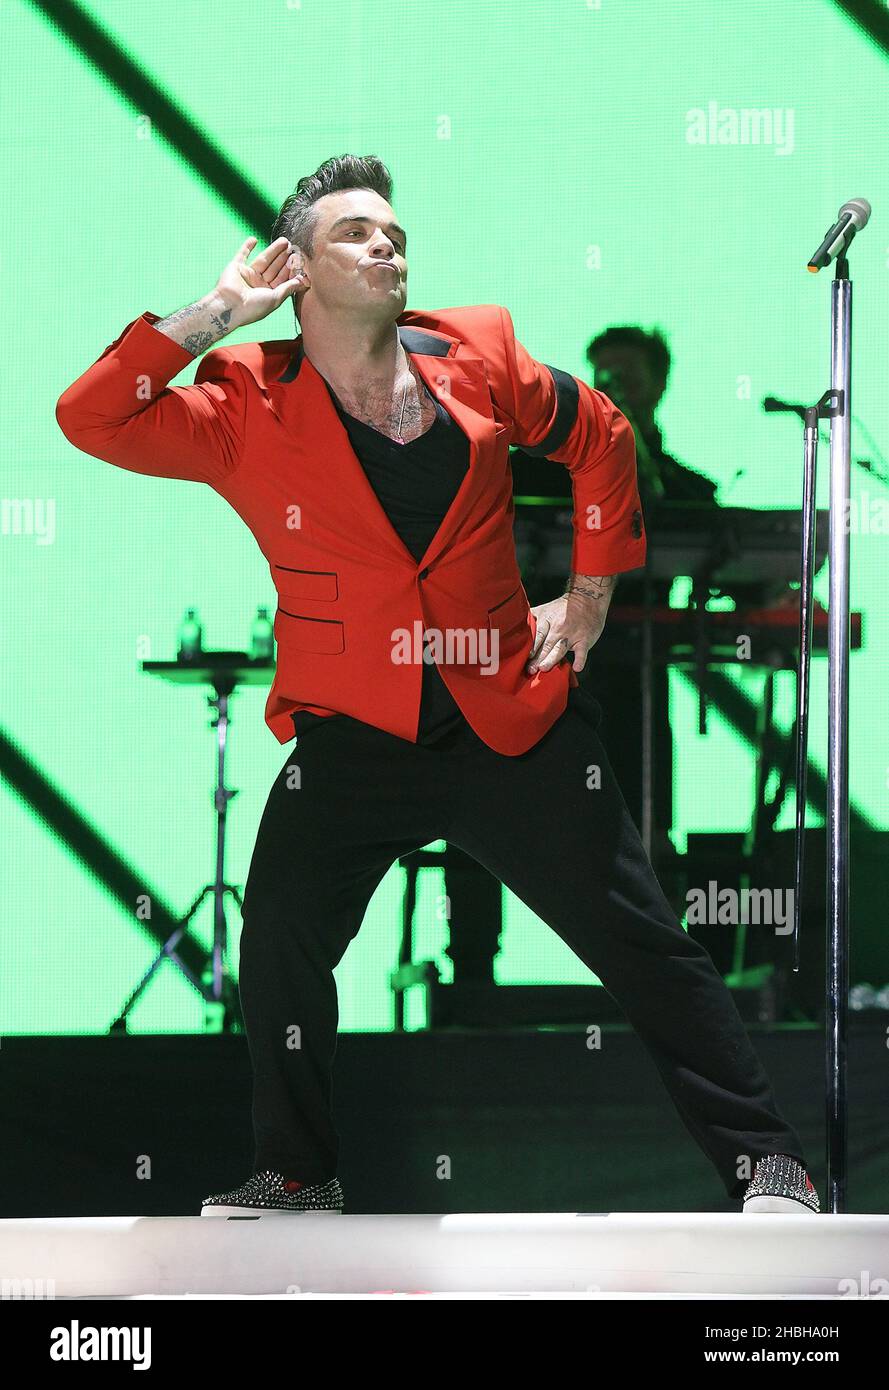 Robbie Williams performs on stage at Capital FM's Summertime Ball at Wembley Stadium, London. Stock Photo